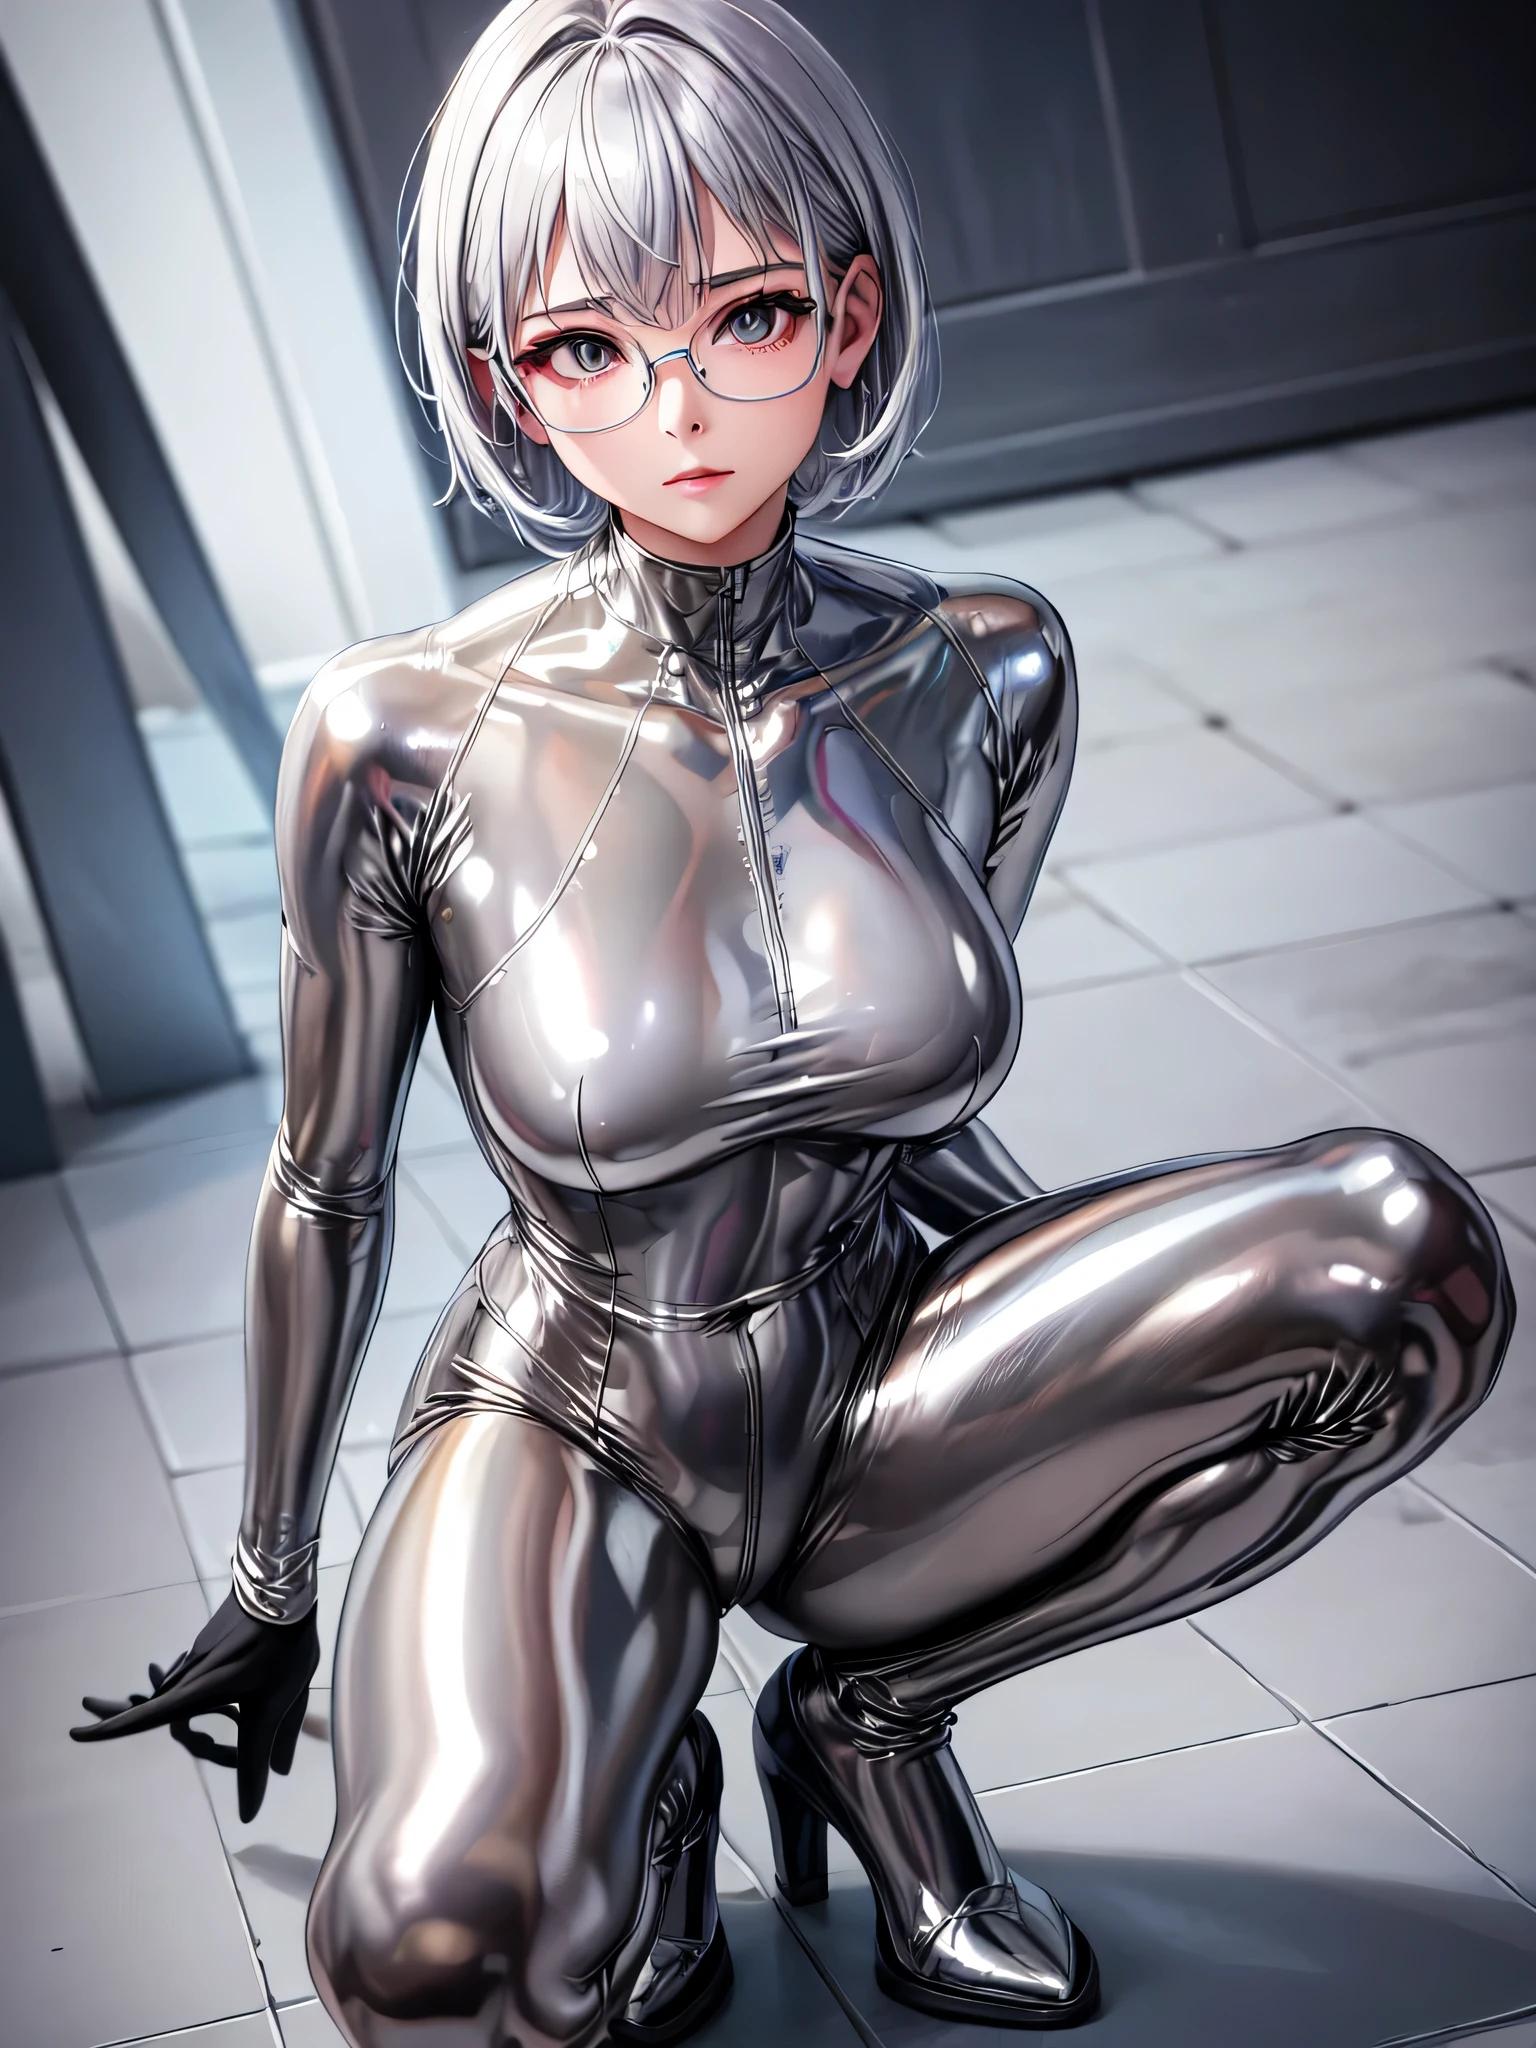 Highest quality 8K UHD、Mastepiece、Upper Body、short hair、Wide-open legs、Squatting with legs apart、Silver Hair、Glasses、Full body shiny silver tights、A beautiful woman wearing a silver metallic suit、Full body silver metallic rubber suit